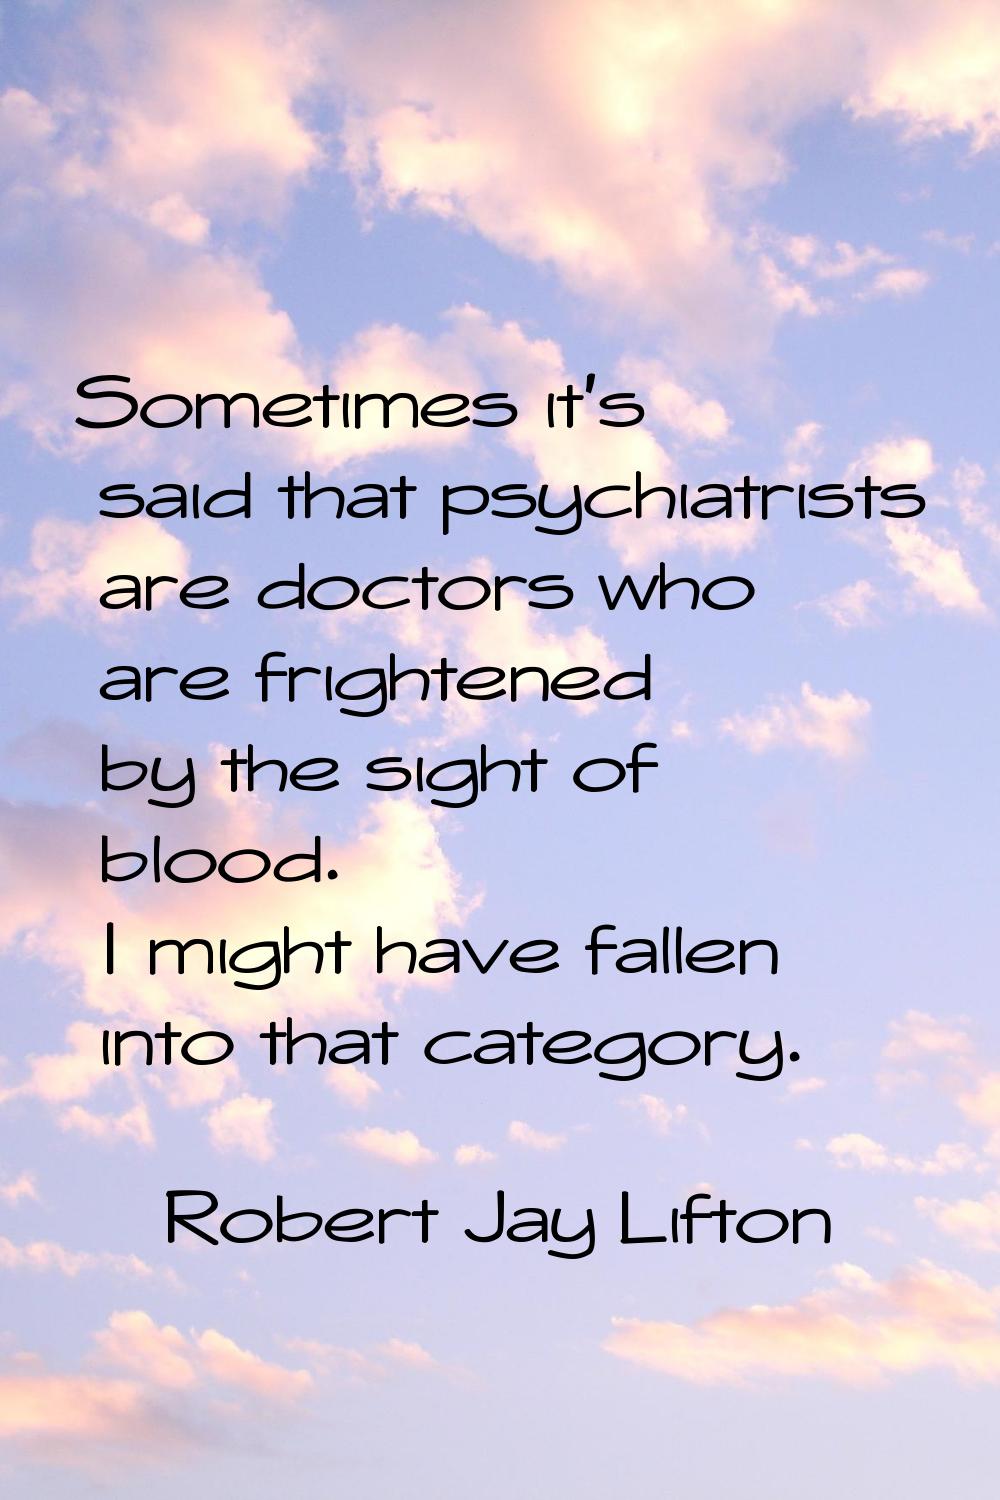 Sometimes it's said that psychiatrists are doctors who are frightened by the sight of blood. I migh